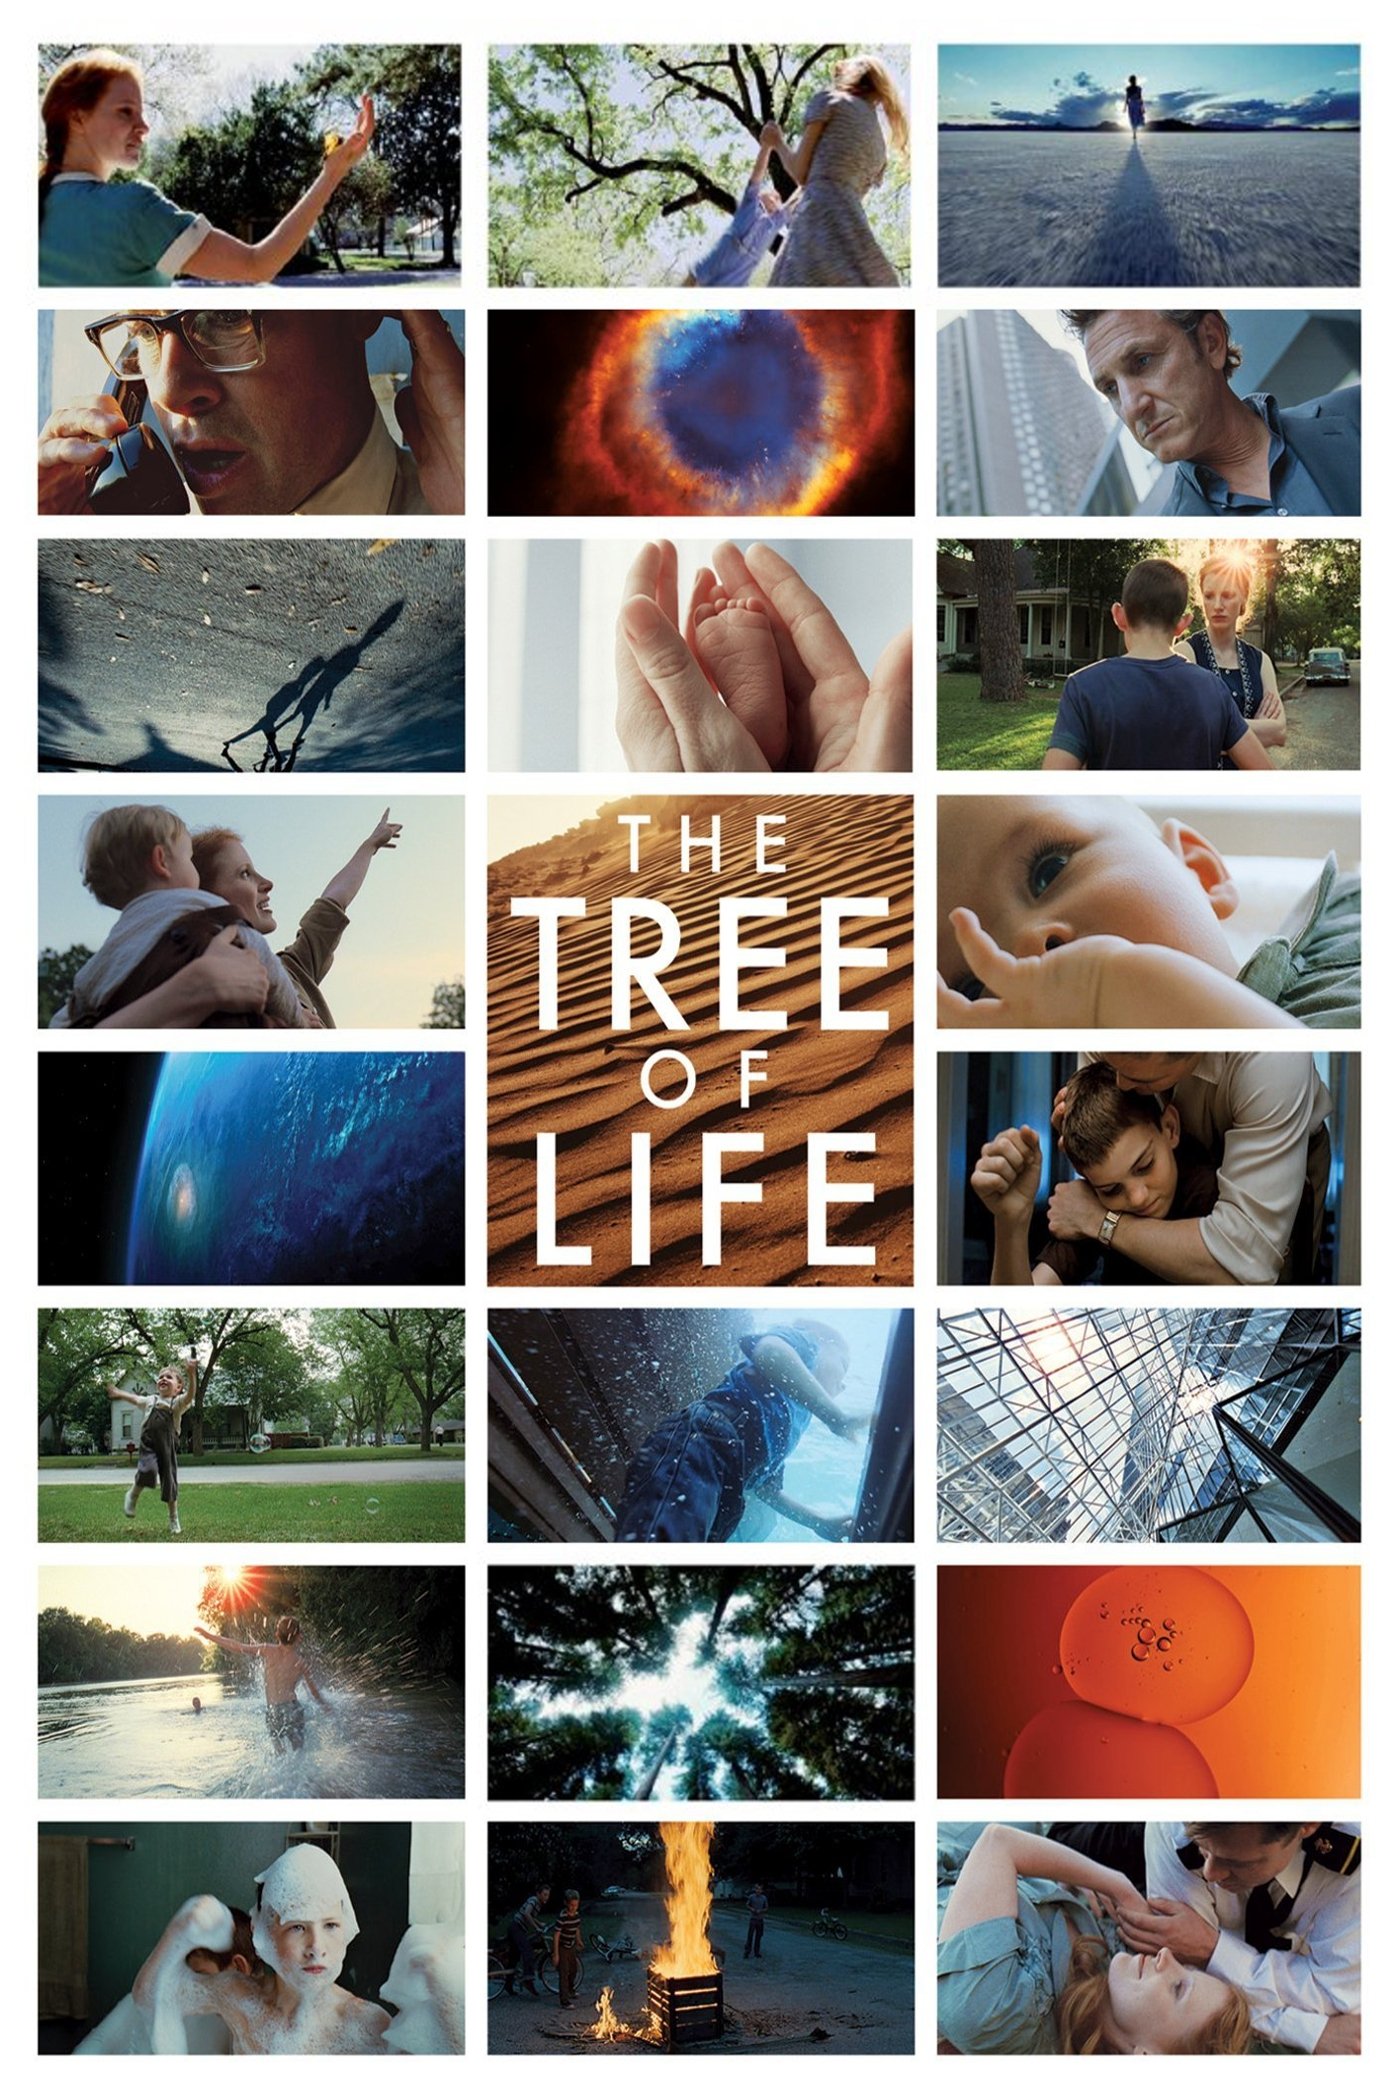 Poster for the movie "The Tree of Life"